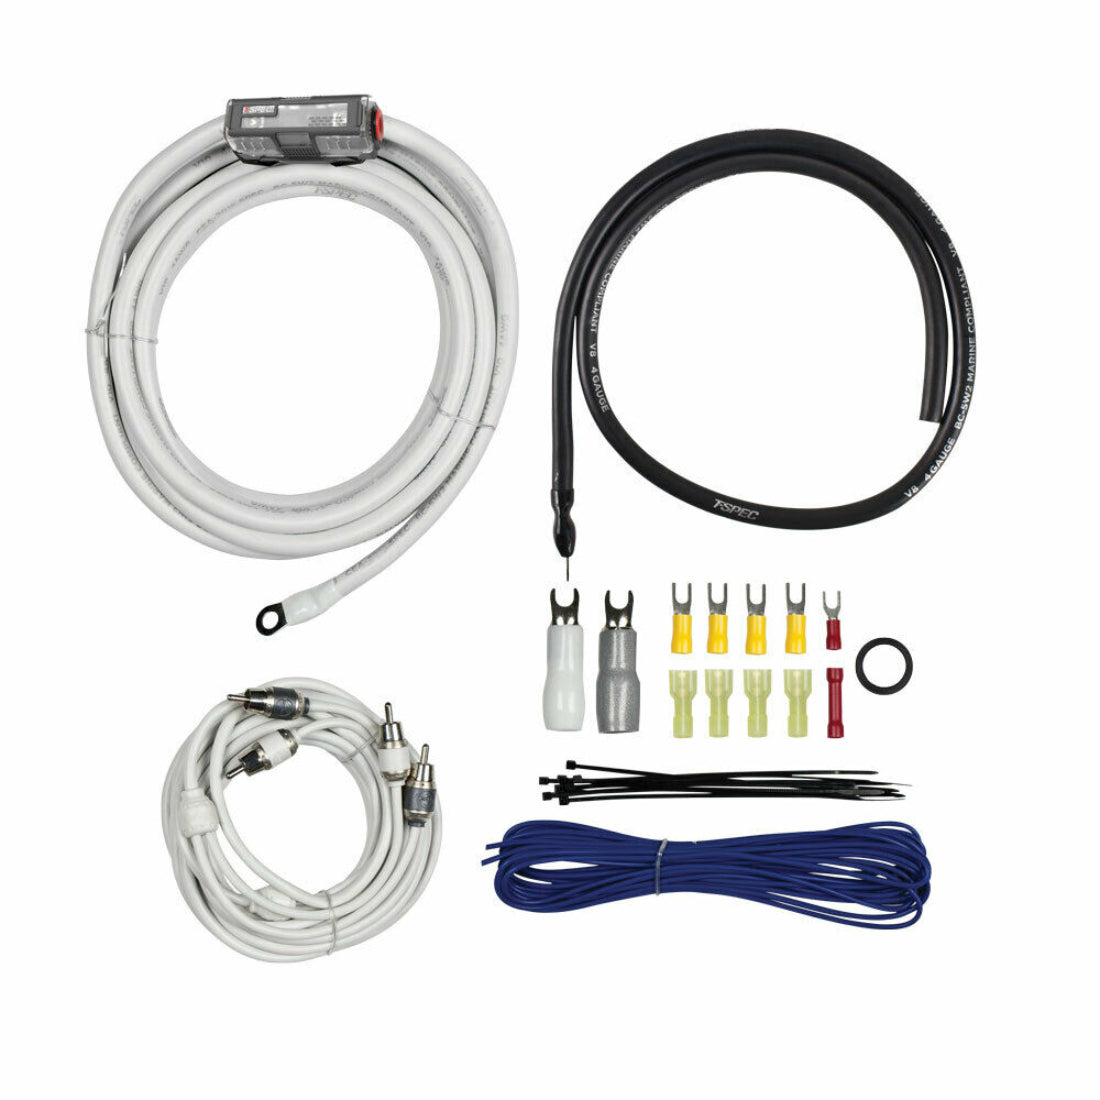 T-Spec V10-AK4 4 AWG Gauge Car Audio Amplifier Wiring Kit w/ RCA Cable